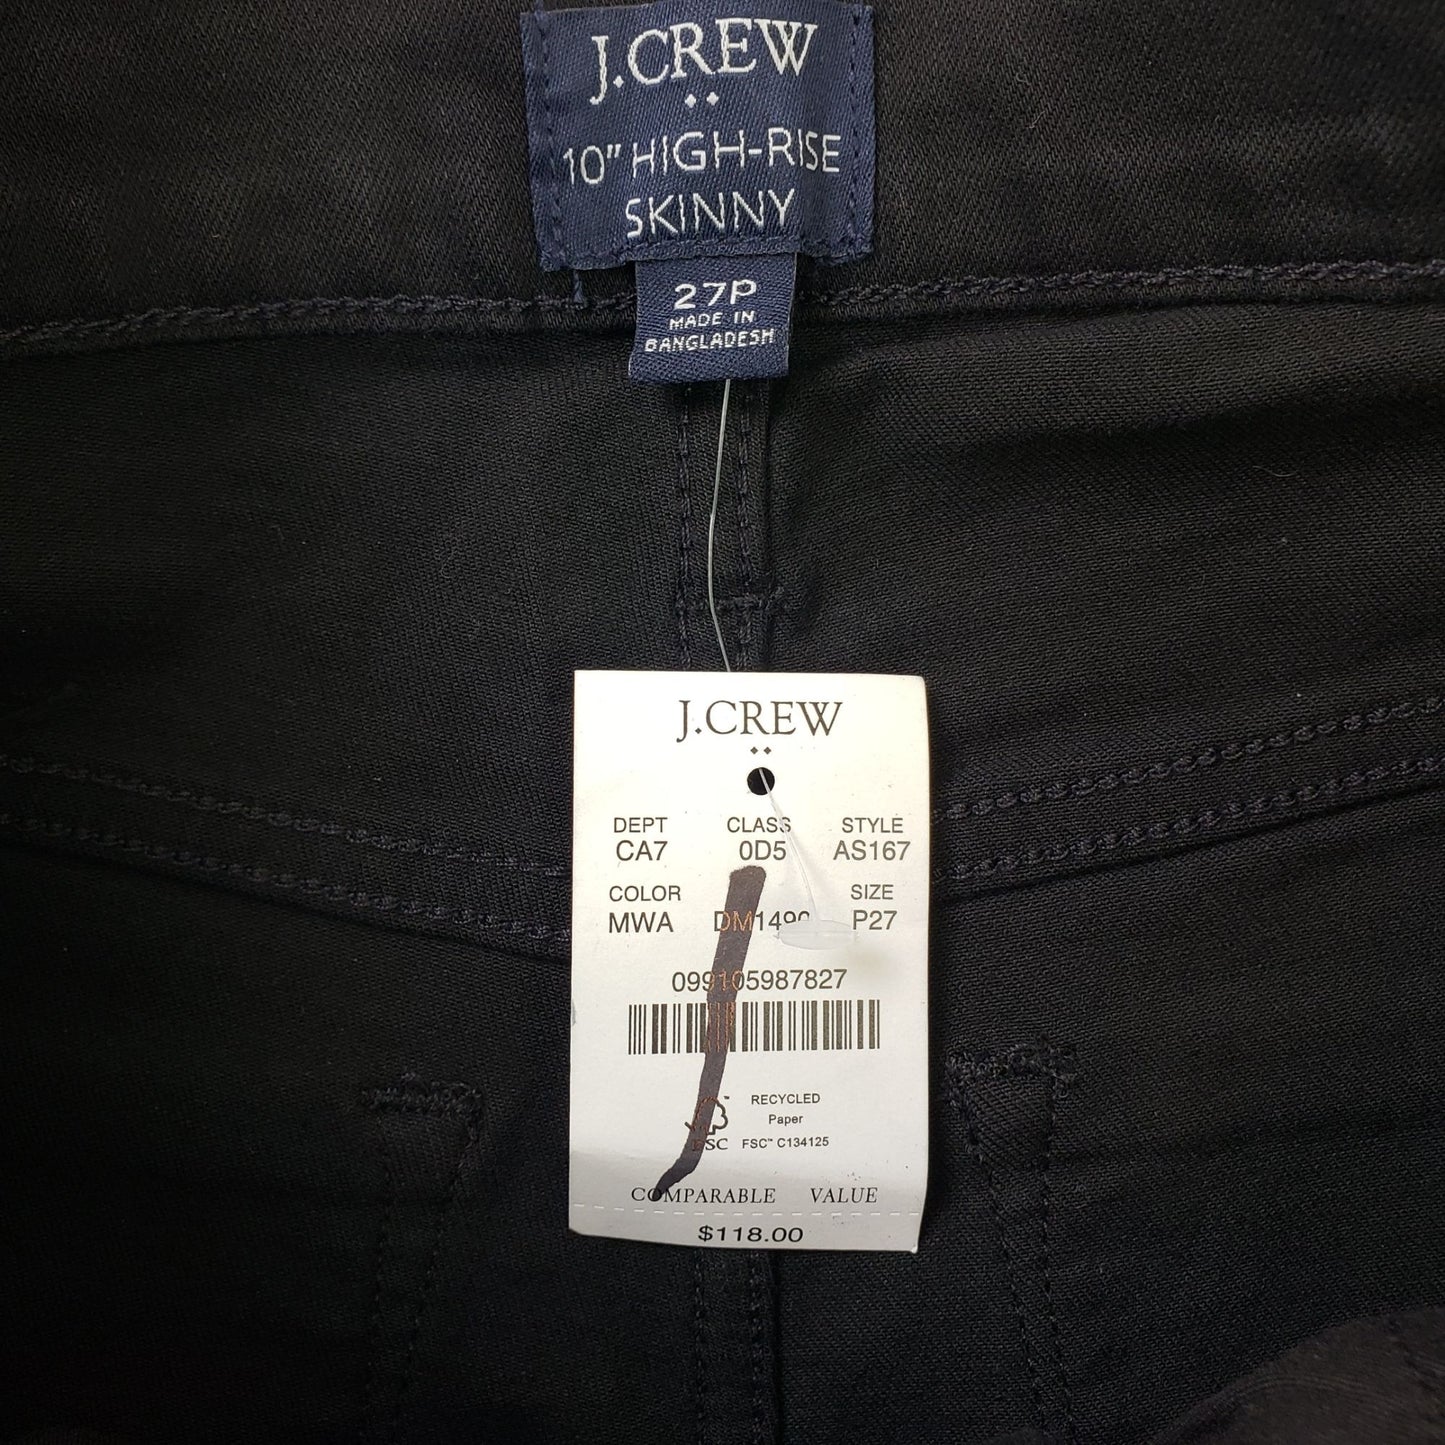 NWT J. Crew Factory 10" Skinny High Rise Jeans Size 27 Petite